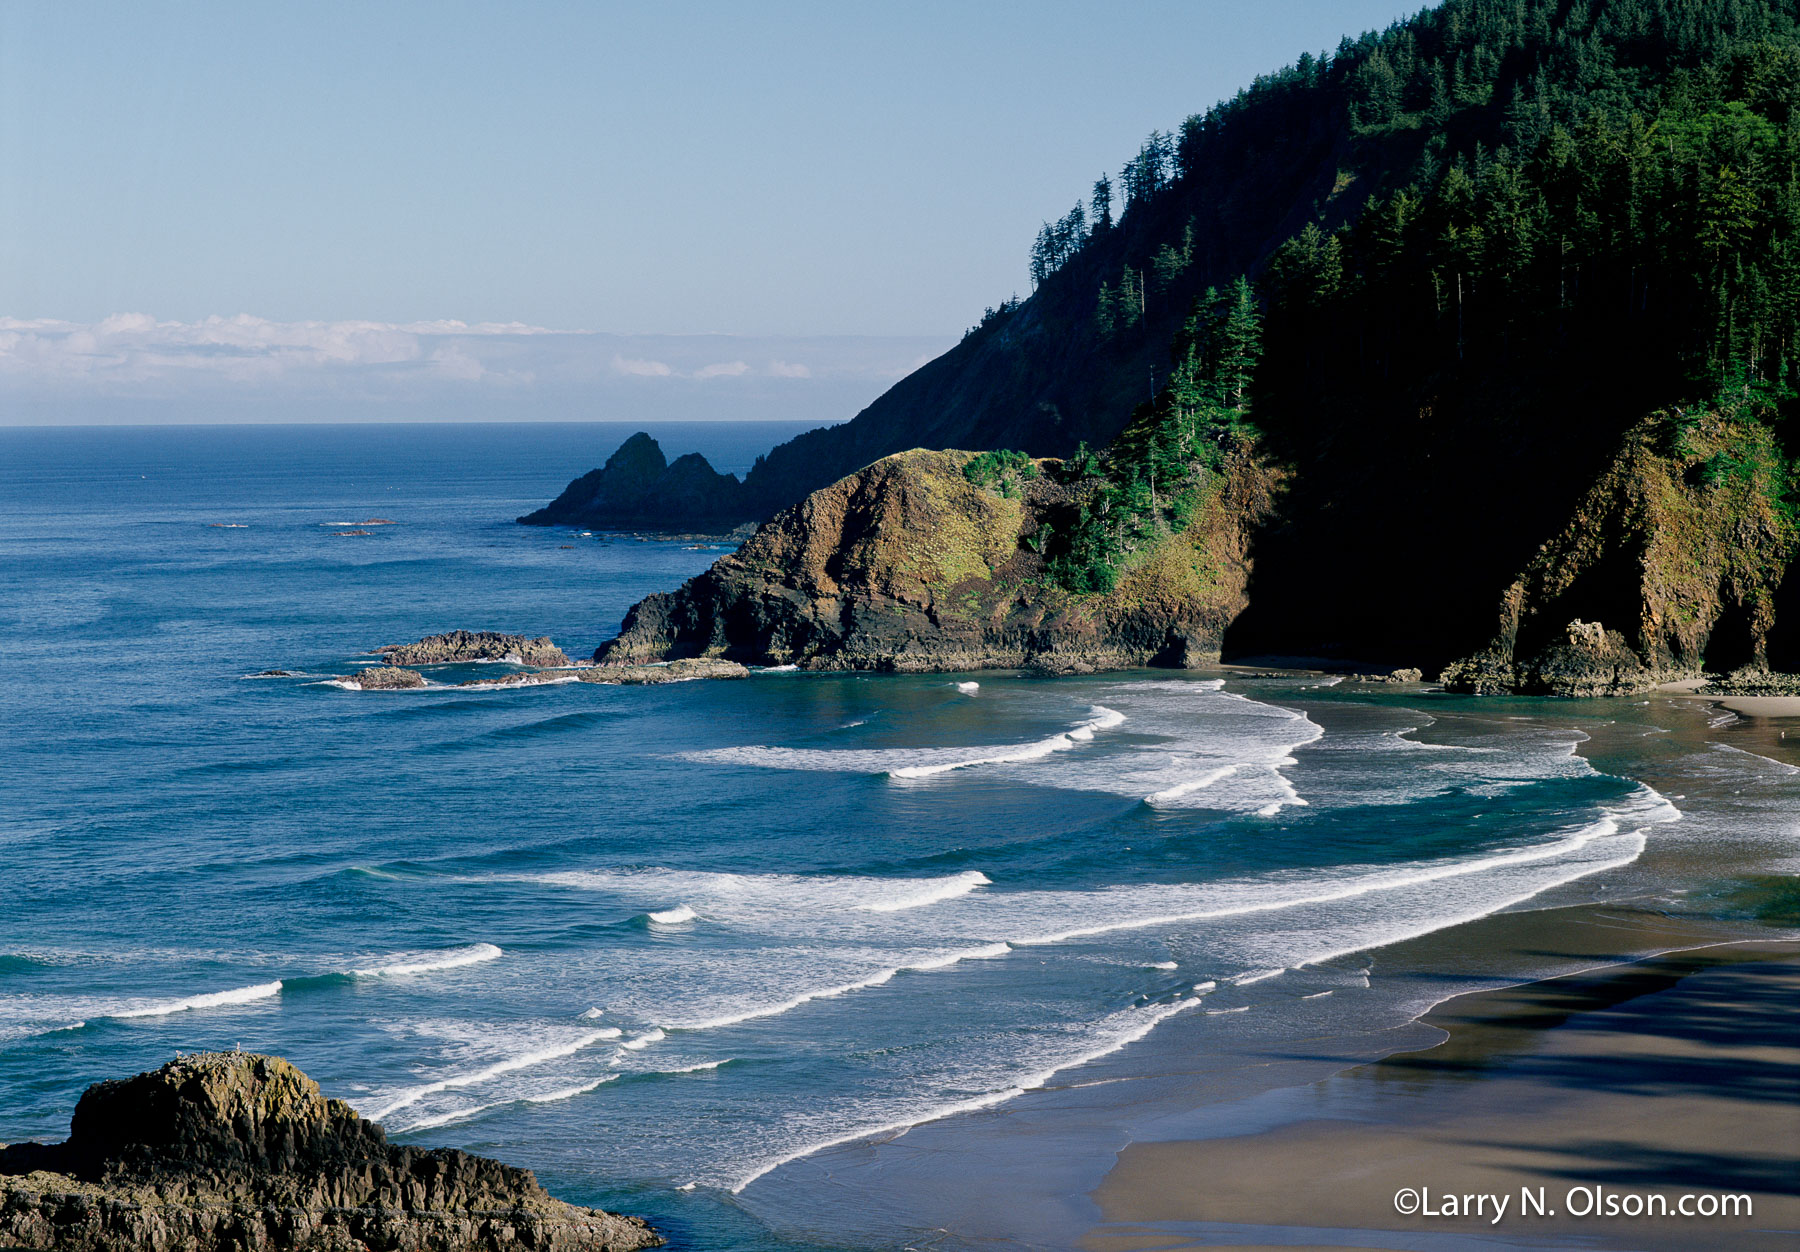 Indian Beach, Ecola State Park, OR | Tillamook Head shelters the cove here and surf rolls onto the sandy beach.